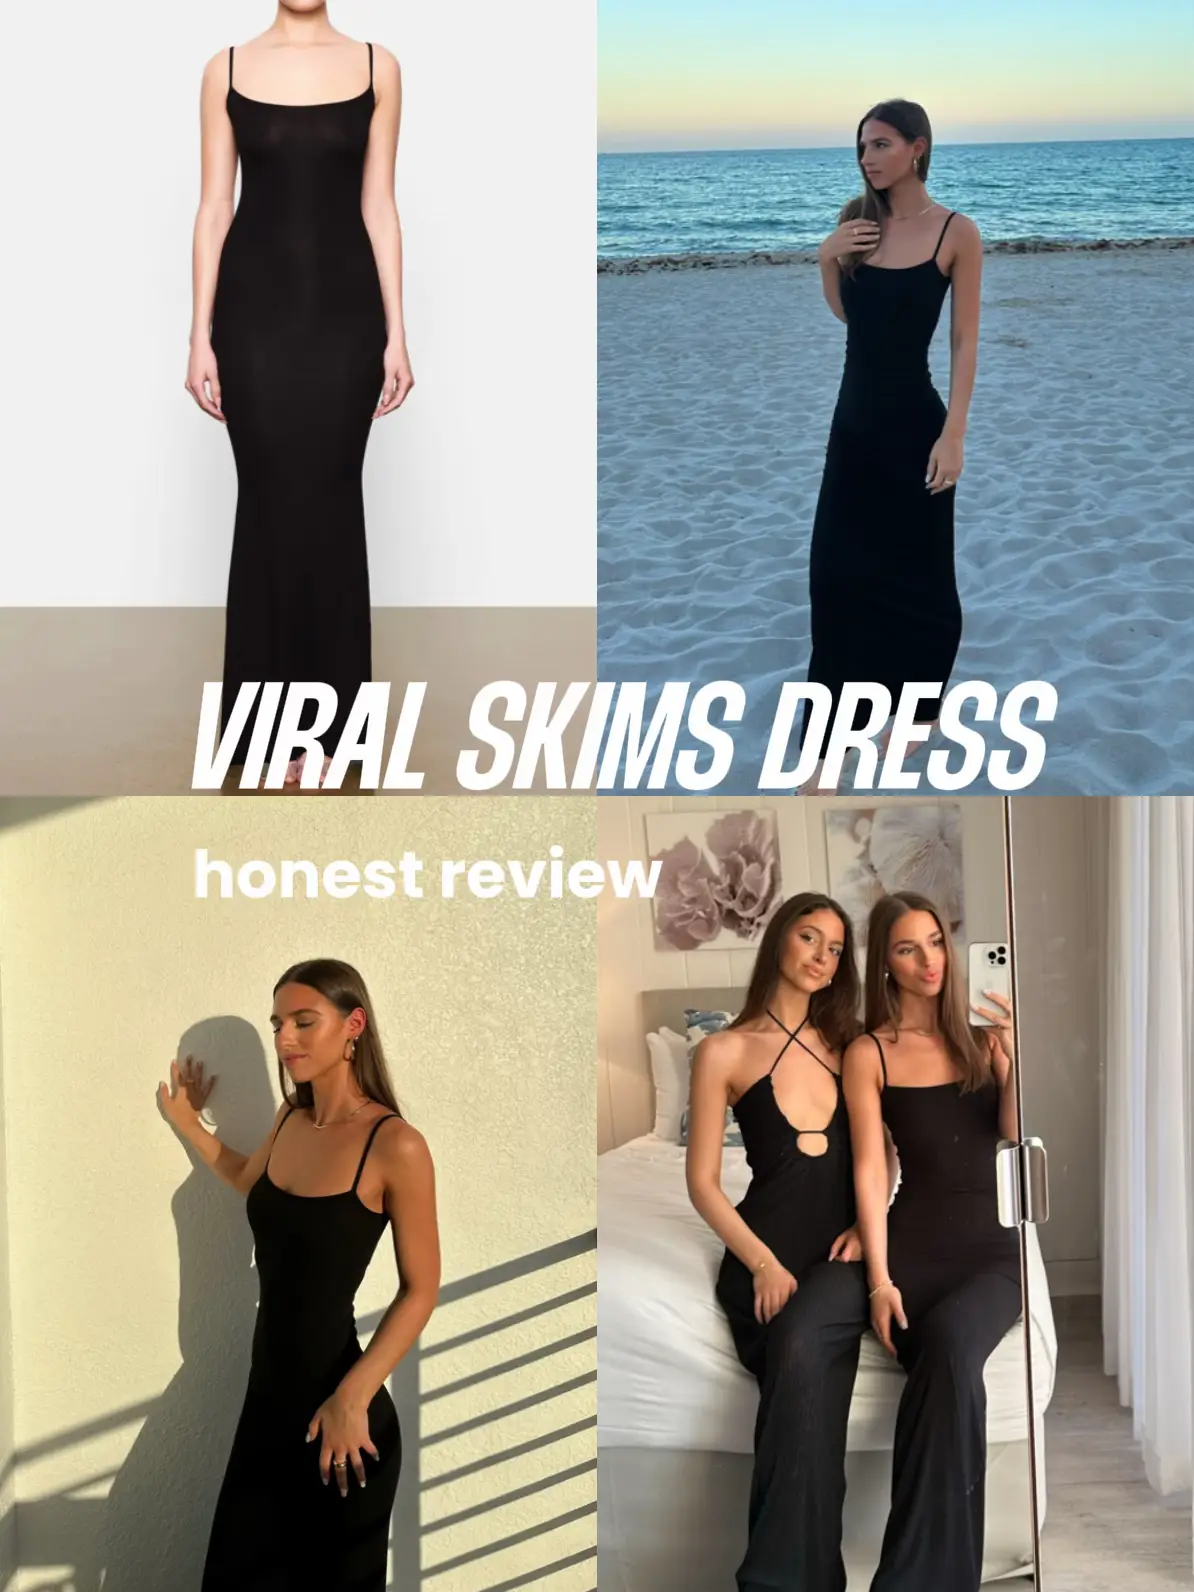 Trying on SKIMS dresses 👗, Gallery posted by Meltem Arifi